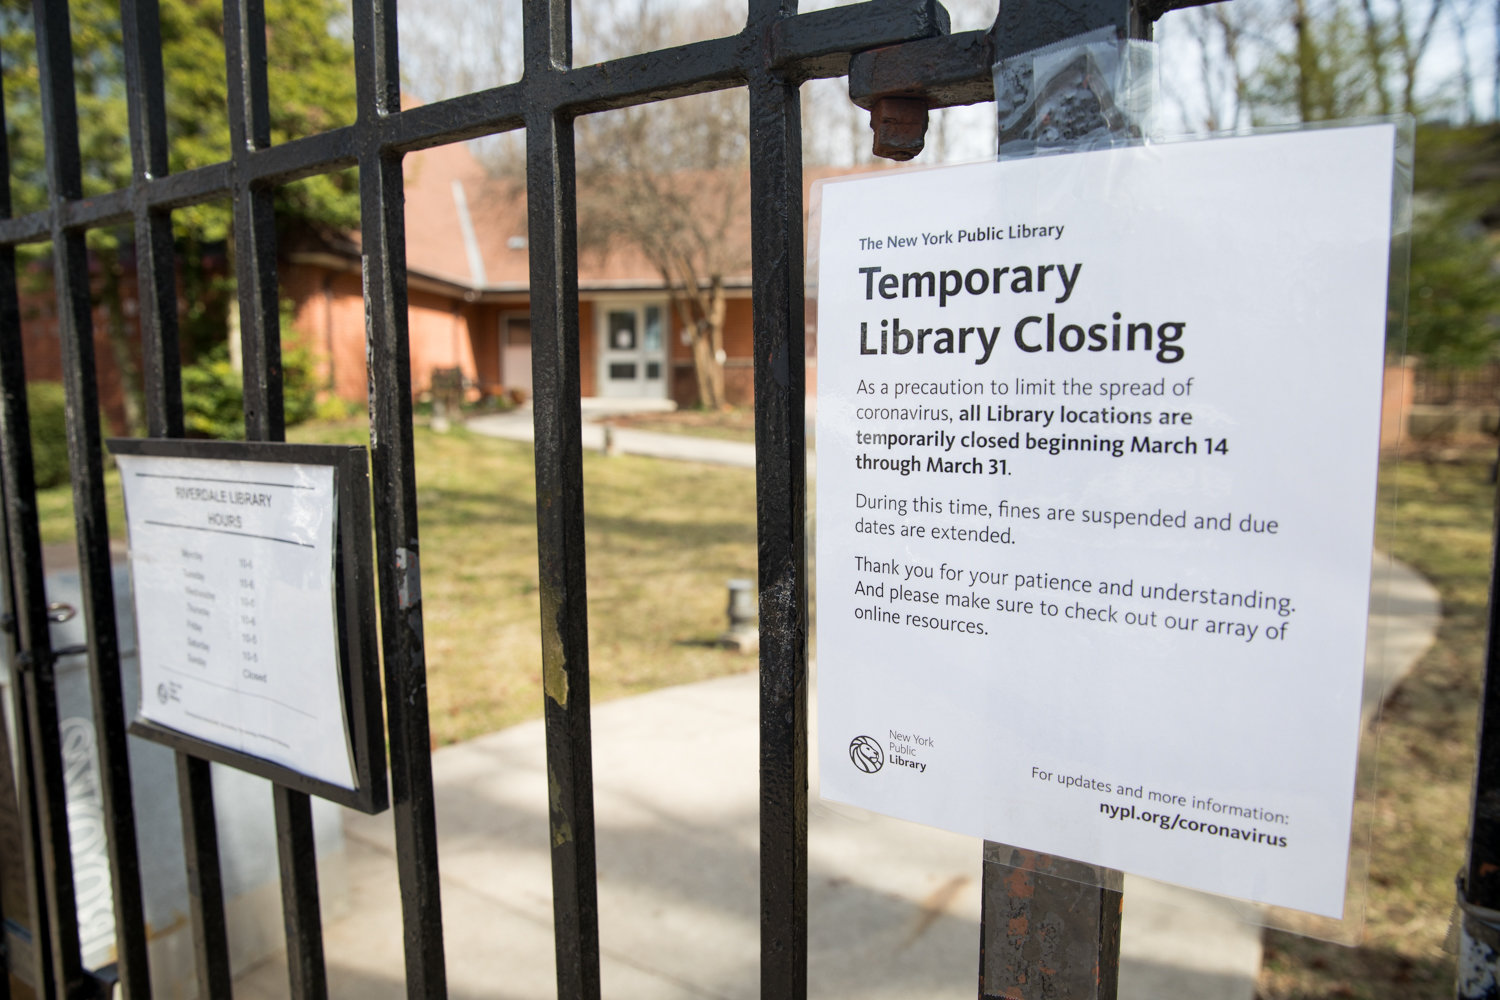 A sign announces the temporary closure of the Riverdale Library in response to the coronavirus outbreak. The library is scheduled to reopen March 31.